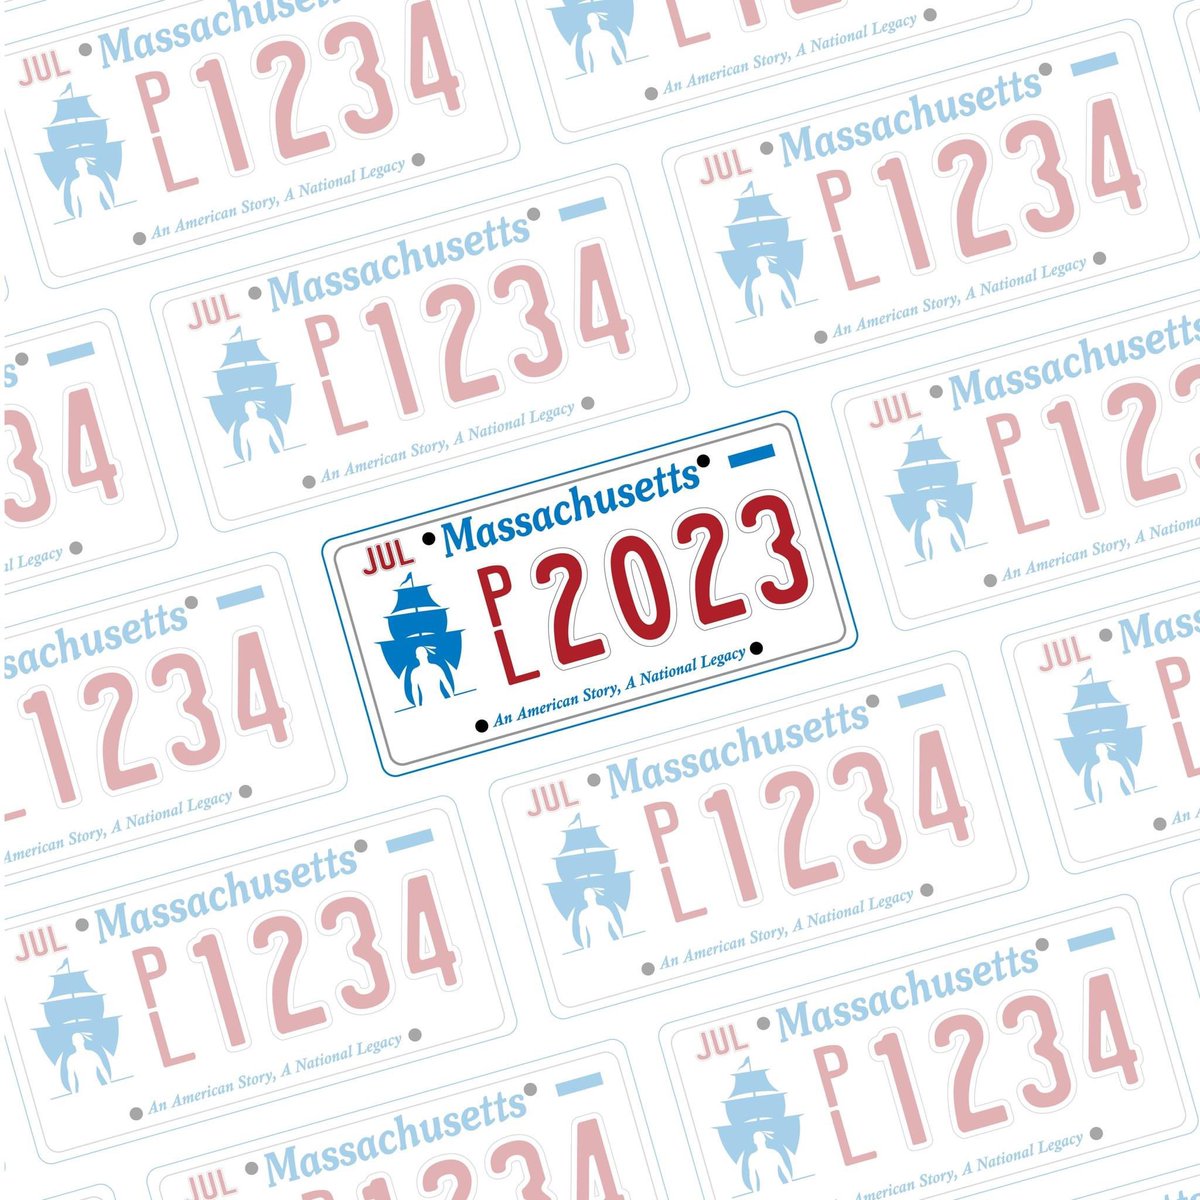 Plymouth 400 Legacy will continue to support programs & projects that commemorate the #history and promote the future of #Plymouth, MA. Our support comes primarily from the sale of Plymouth #LicensePlates. For more info: please visit myplymouthplate.org or any MA RMV office